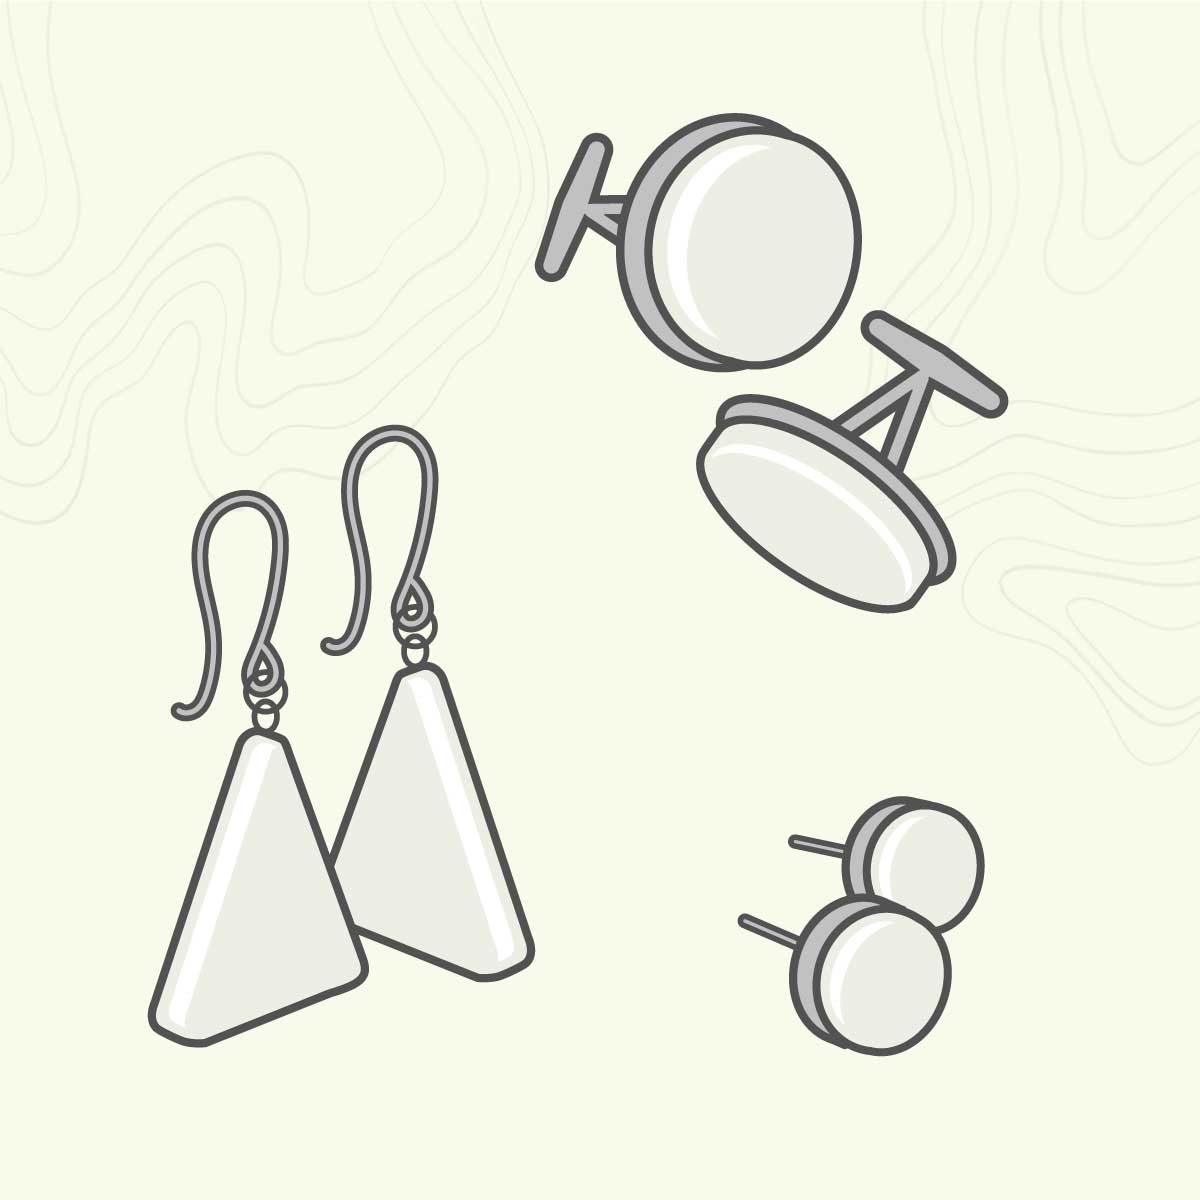 Digital illustrations of earrings, cufflinks, and a necklace colored with grey and cream